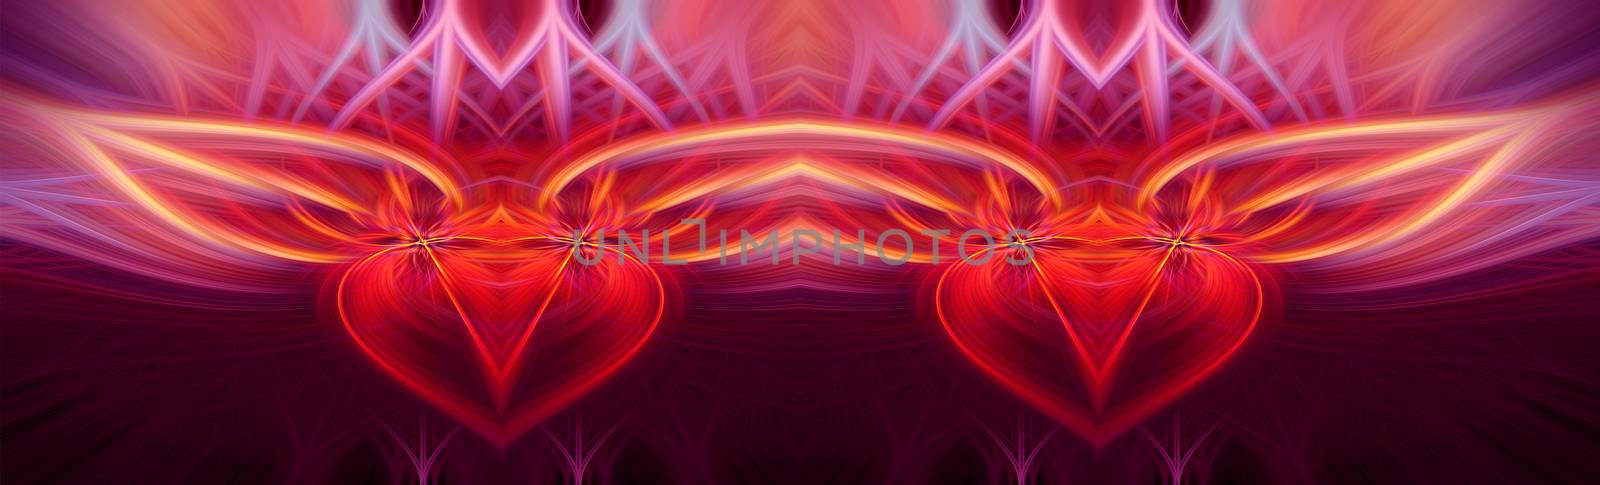 Beautiful abstract intertwined symmetrical 3d fibers forming a shape of a flower, interlinked hearts, alien creature. Pink, red, maroon, orange, and purple colors. Illustration. Banner, panorama size